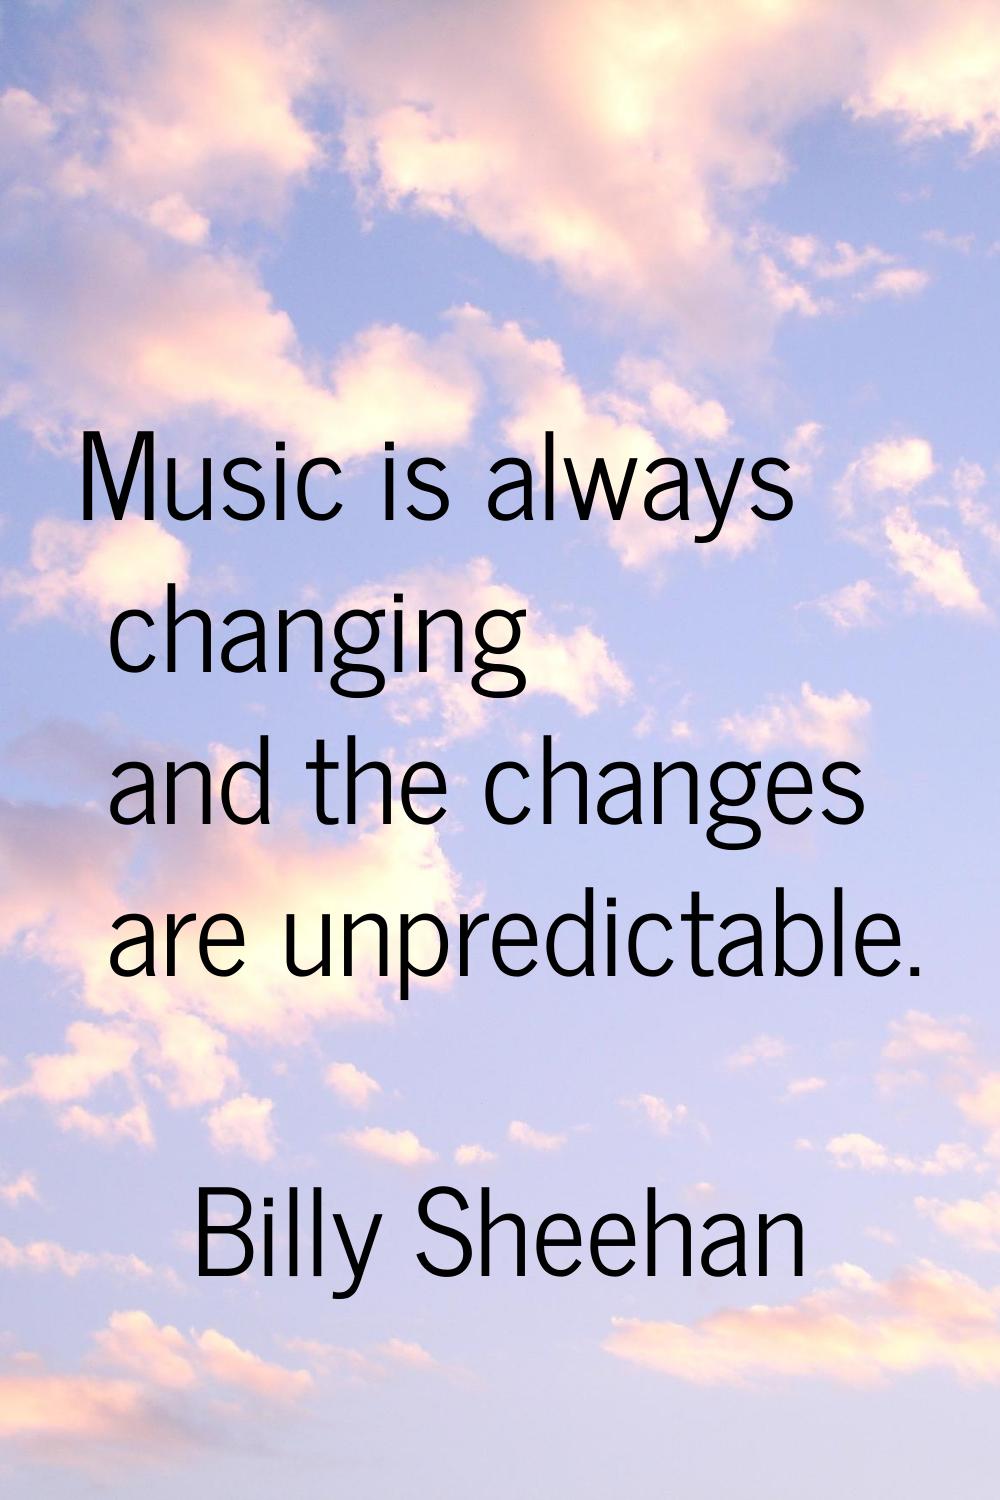 Music is always changing and the changes are unpredictable.